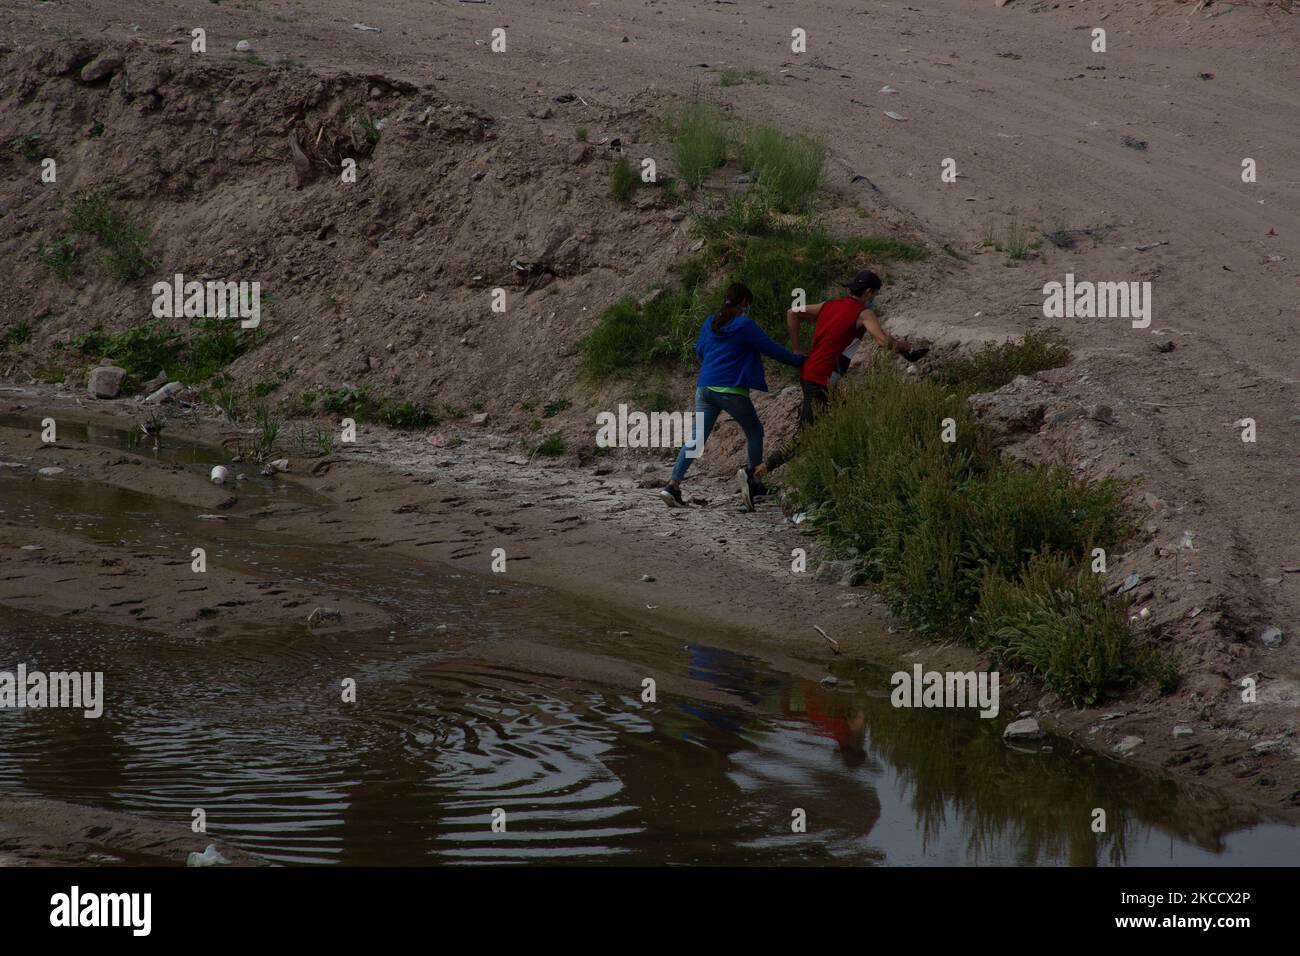 A migrant couple cross the Rio Grande in an attempt to reach the US, near the El Paso border crossing, in Ciudad Juarez, Chihuahua state, Mexico on April 14, 2021. Hundreds of migrants cross illegally into the United States, some hire criminals to help them cross illegally, others simply turn themselves in to the border patrol to try to apply for political asylum (Photo by David Peinado/NurPhoto) Stock Photo